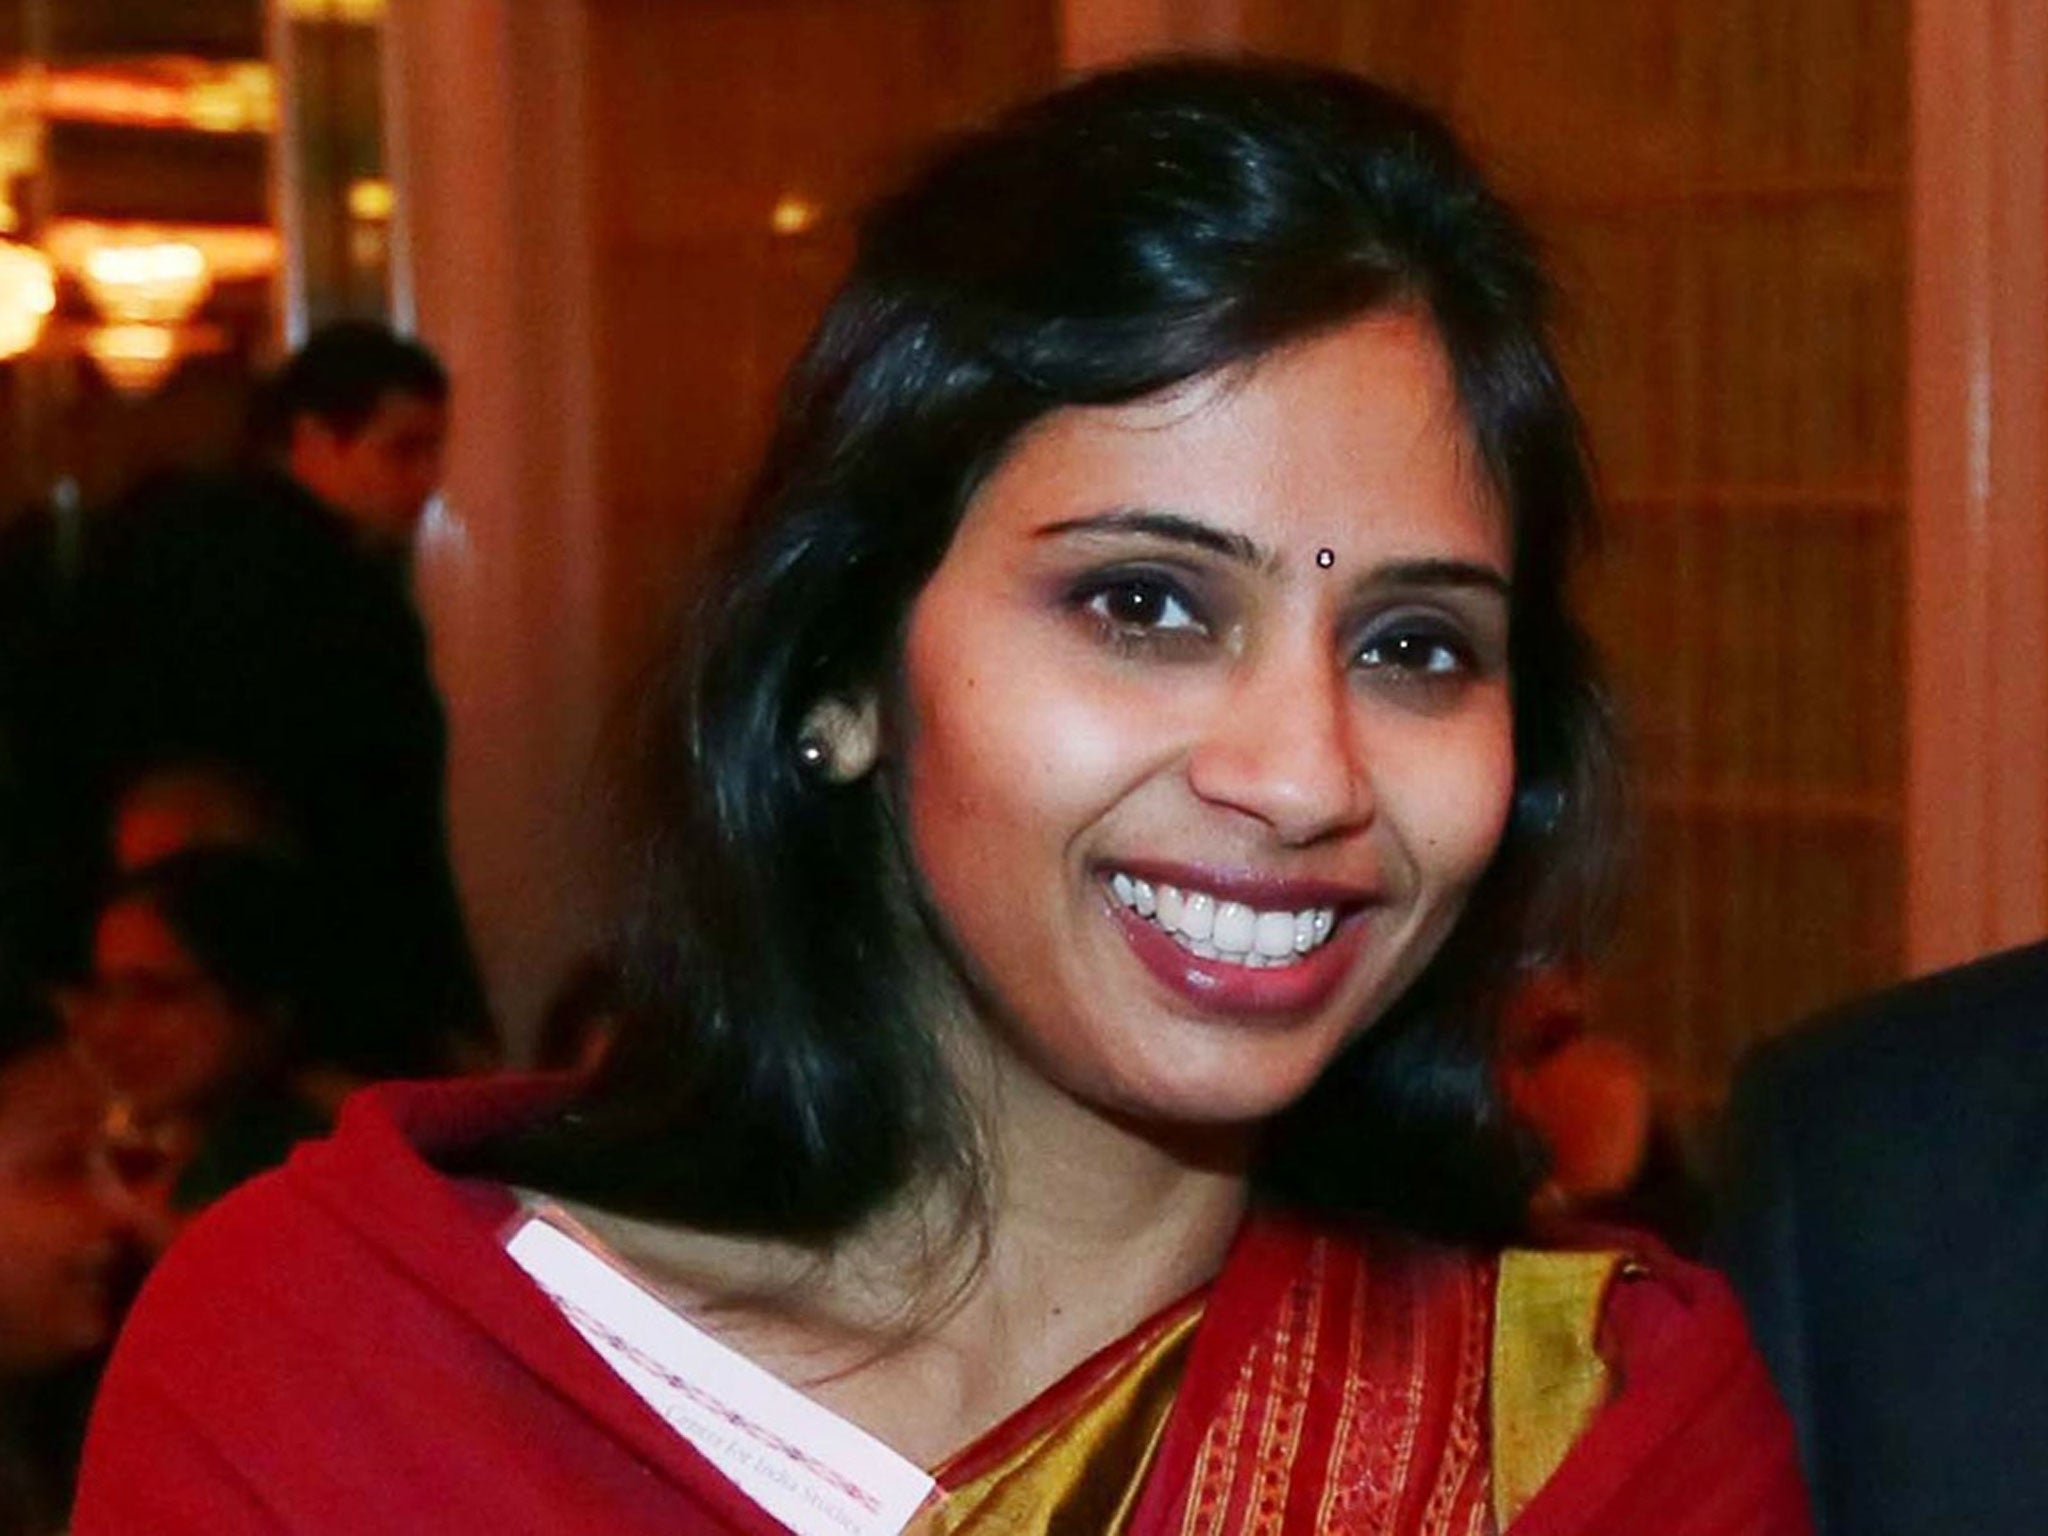 Devyani Khobragade, India's Deputy Consul General, was allegedly handcuffed and strip-searched on her arrest